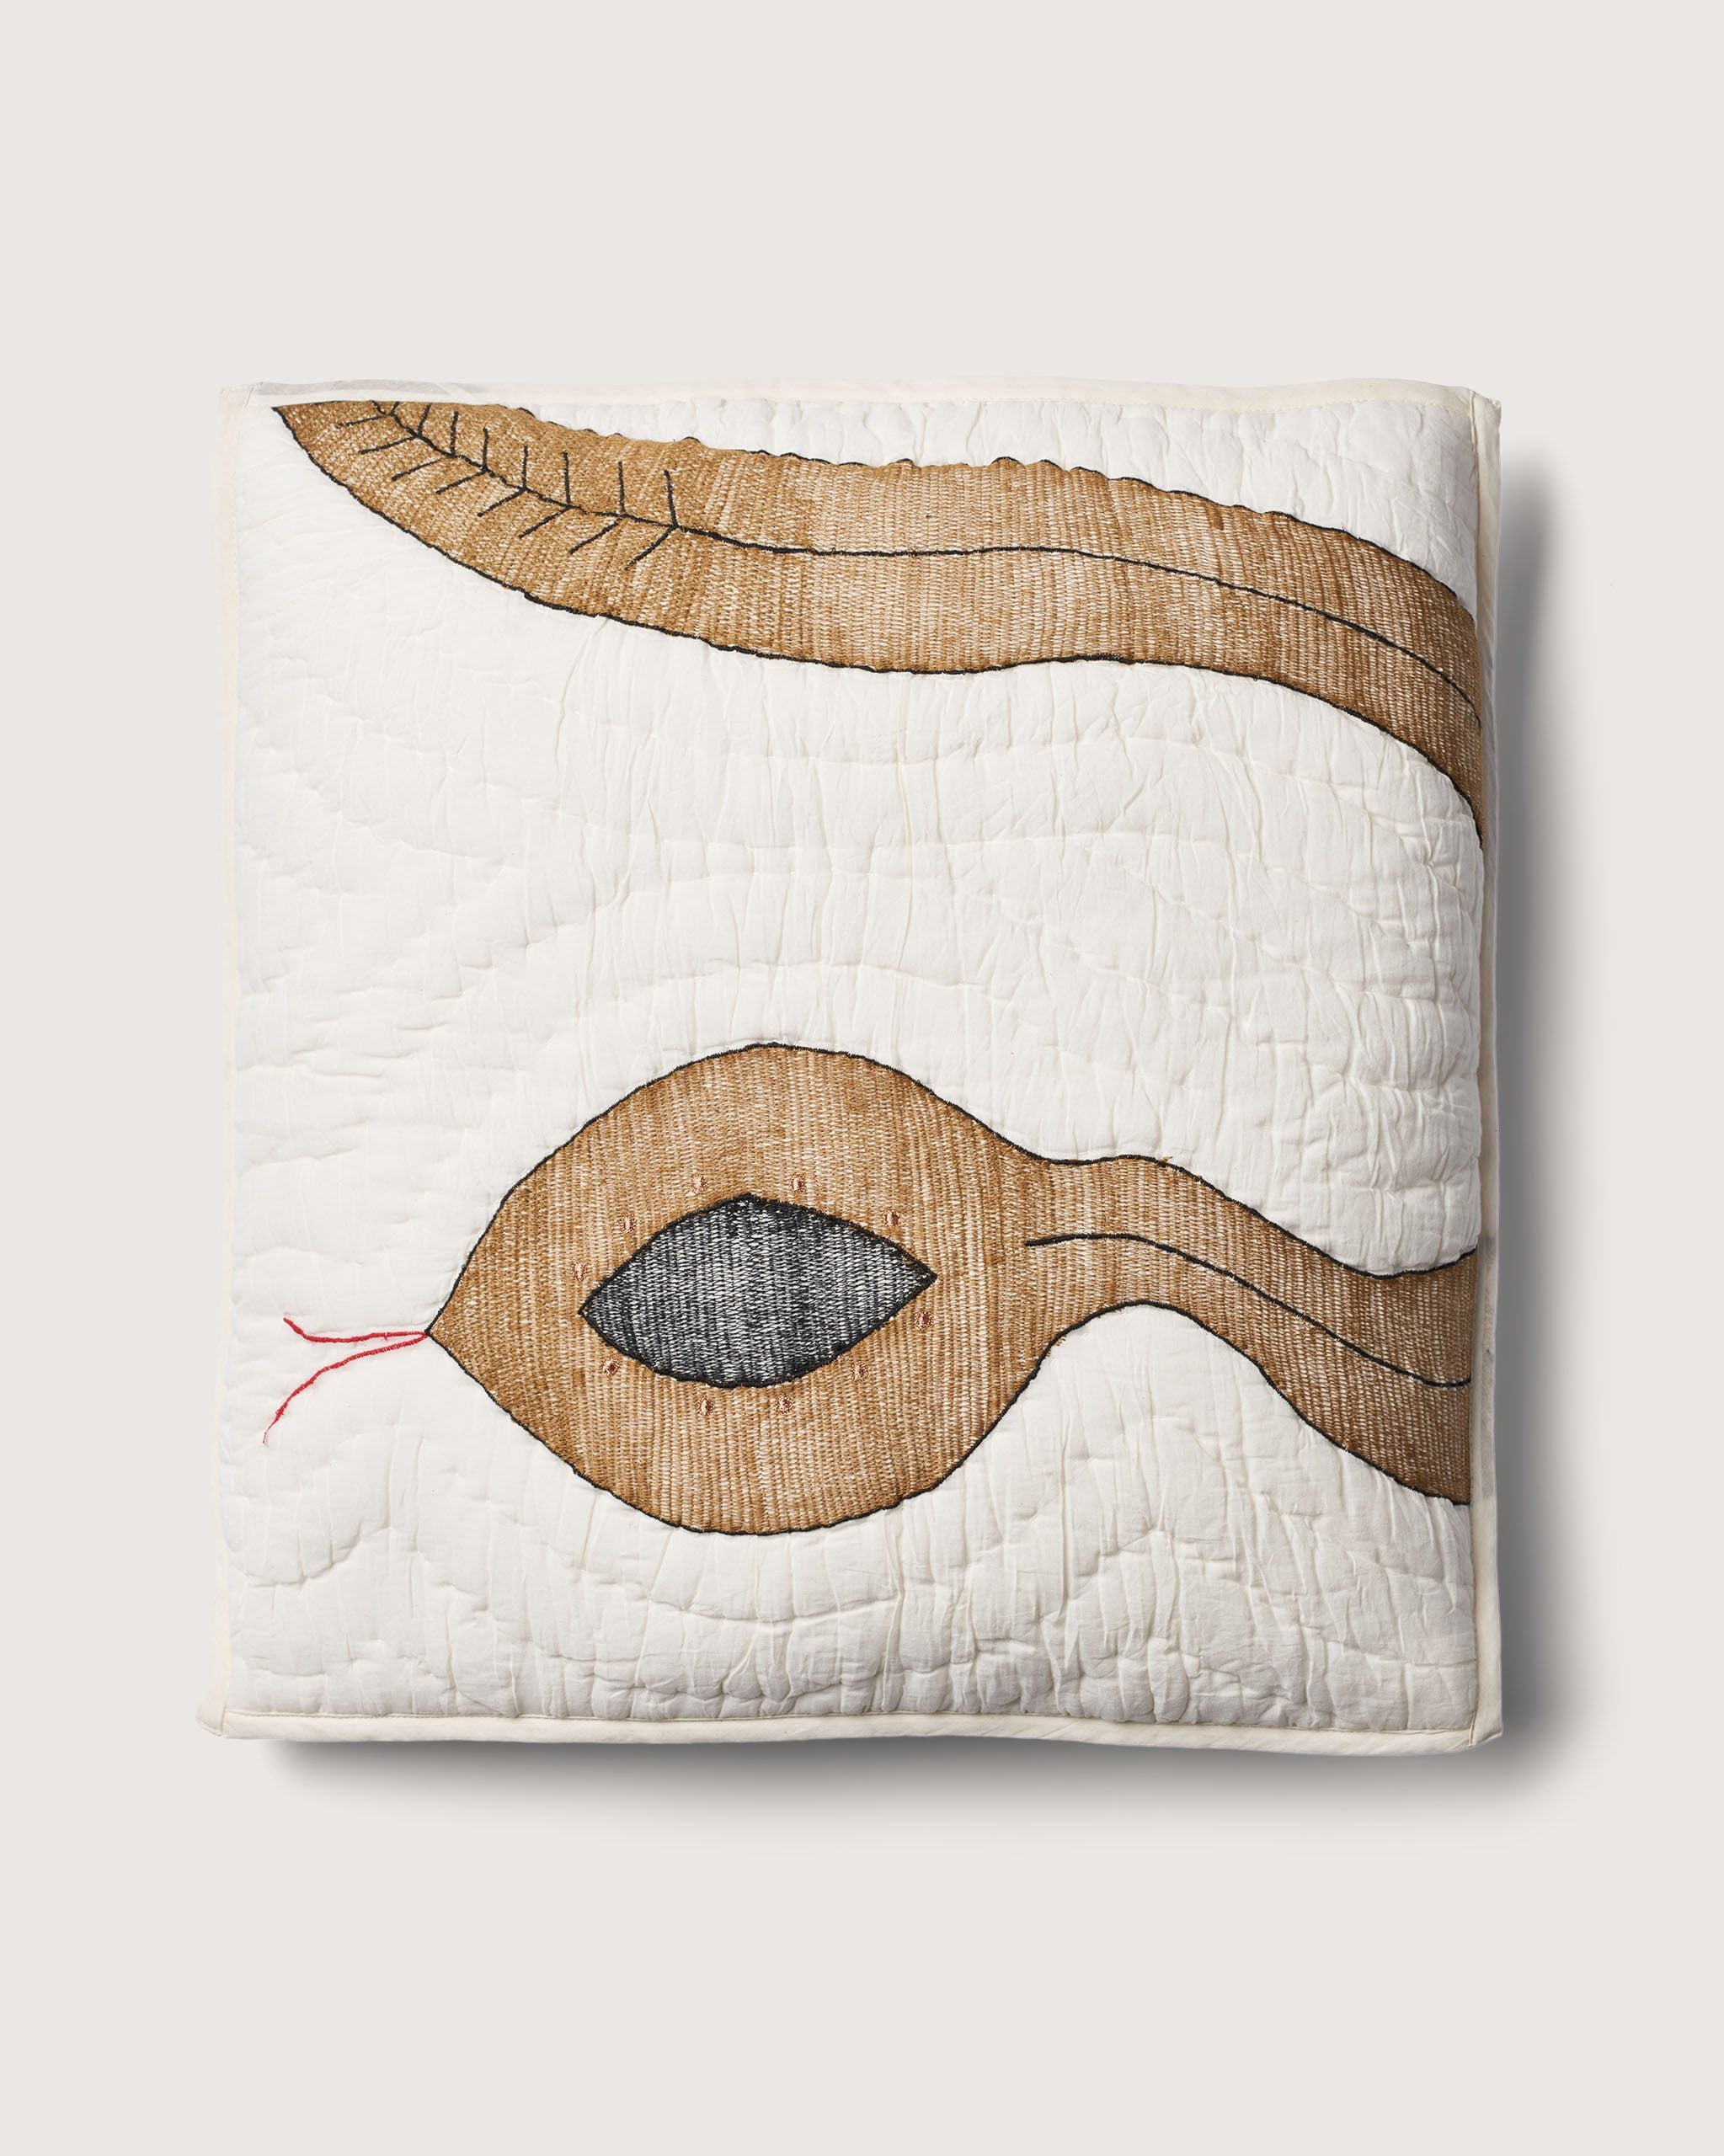 Bongusta, Product image, Snake Quilted Pillow, amber, 1 of 4}